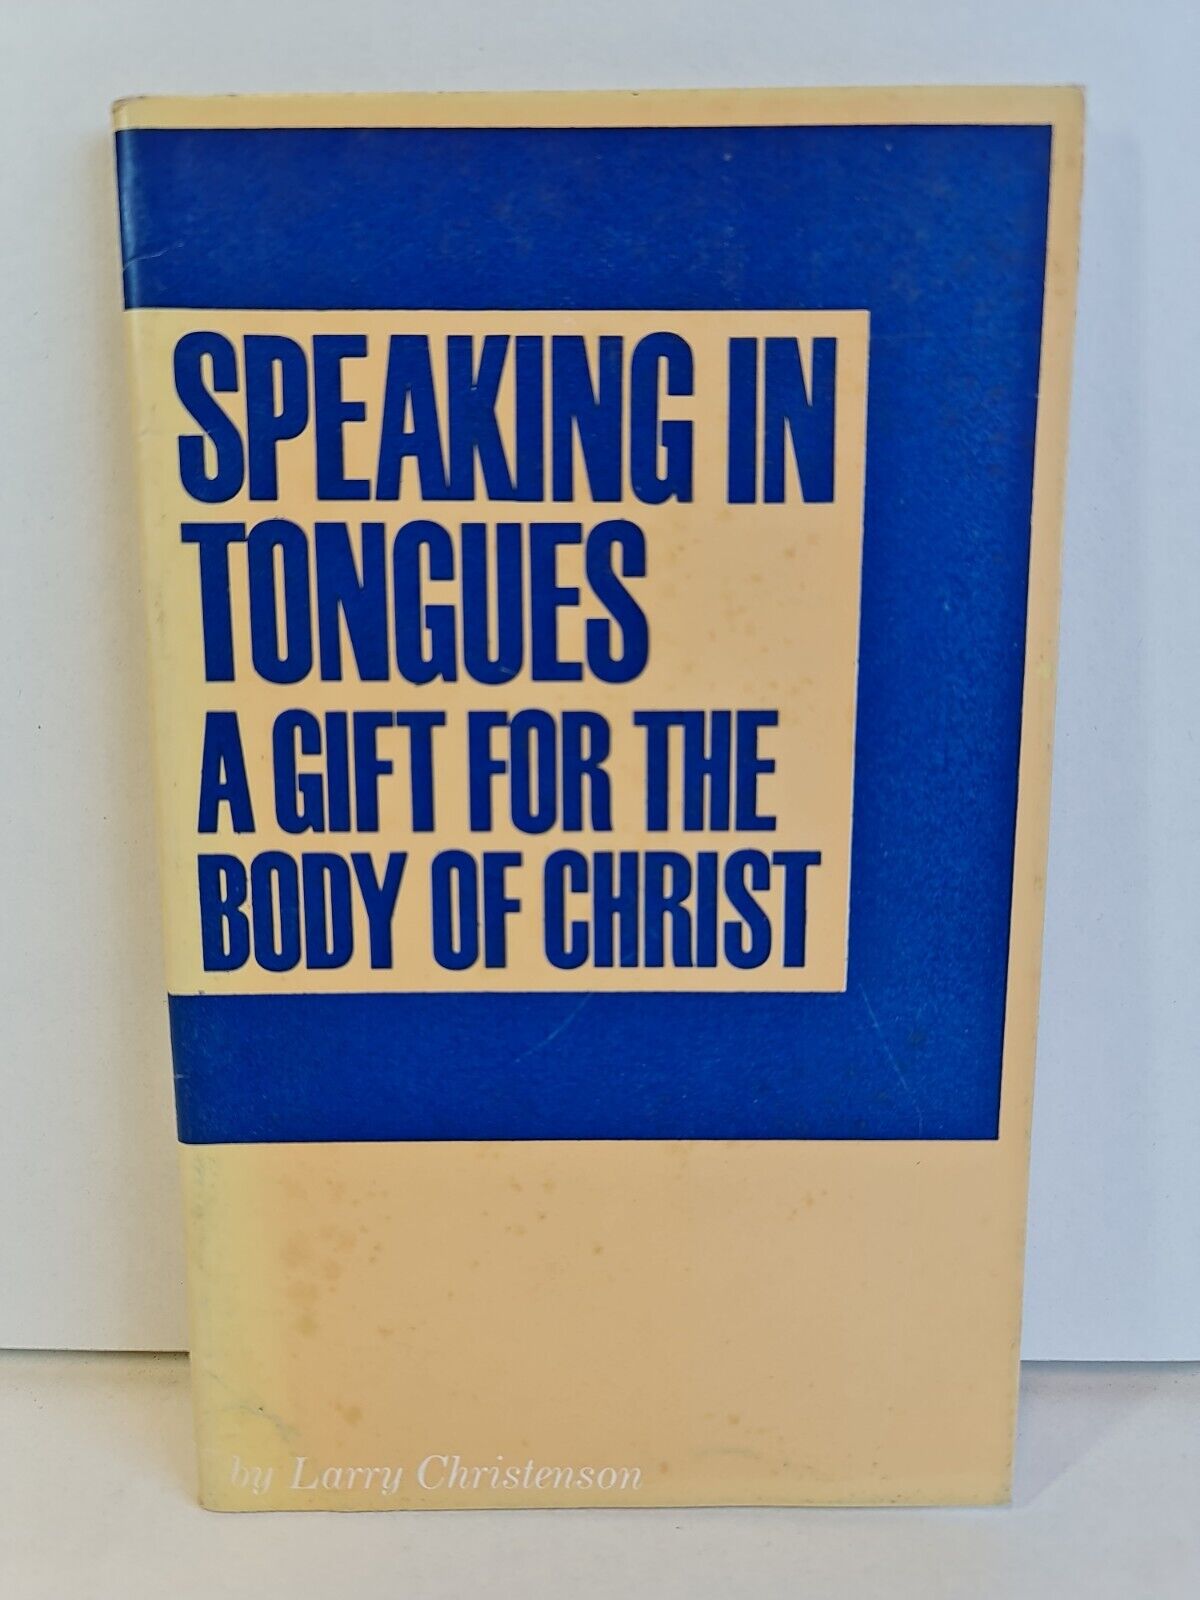 Speaking In Tongues A Gift For The Body Of Christ by Larry Christenson(1970)